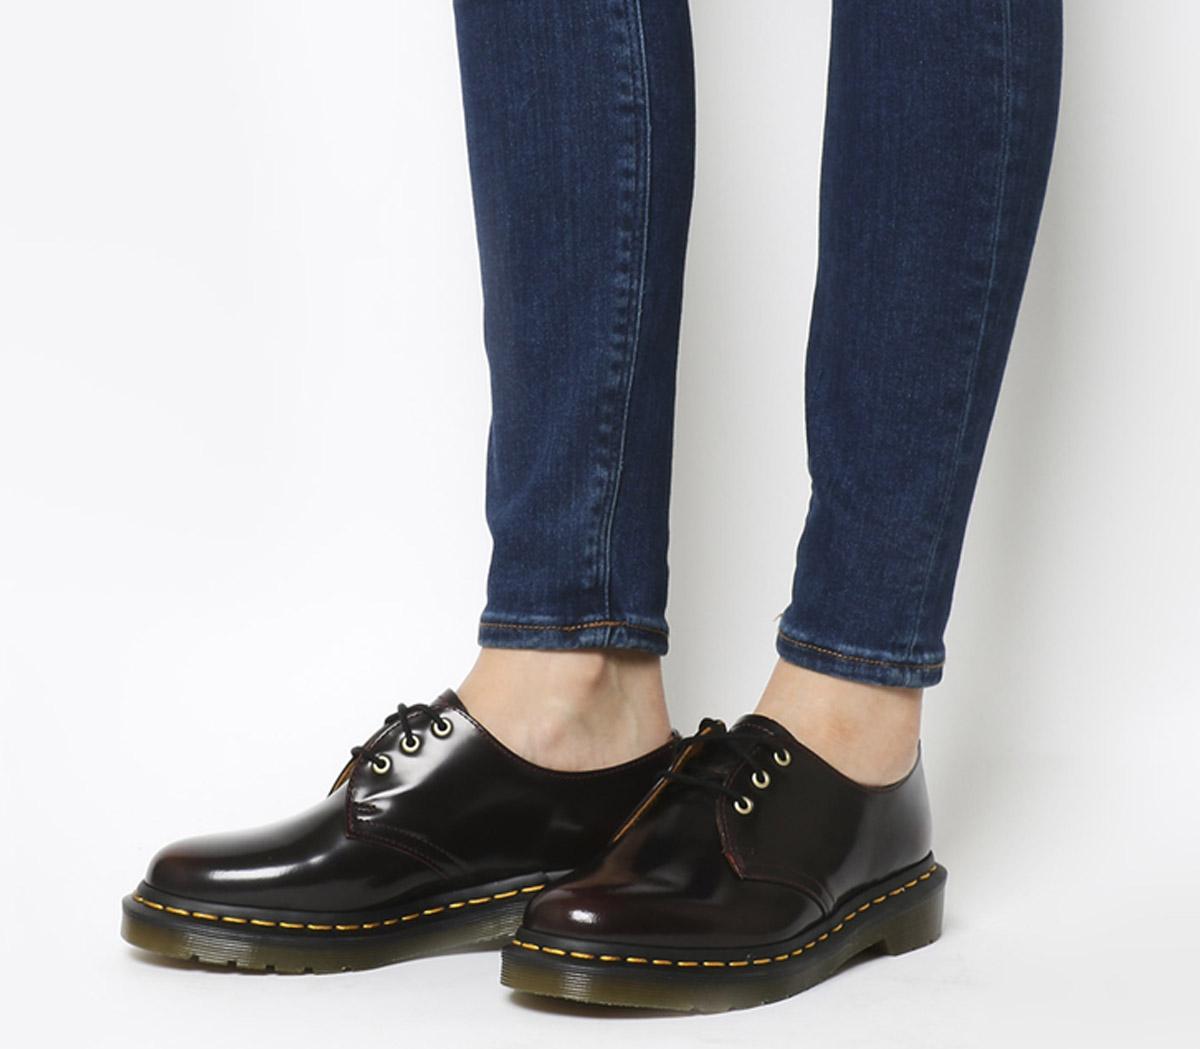 Dr. Martens 1416 Shoes Cherry Red - Flats